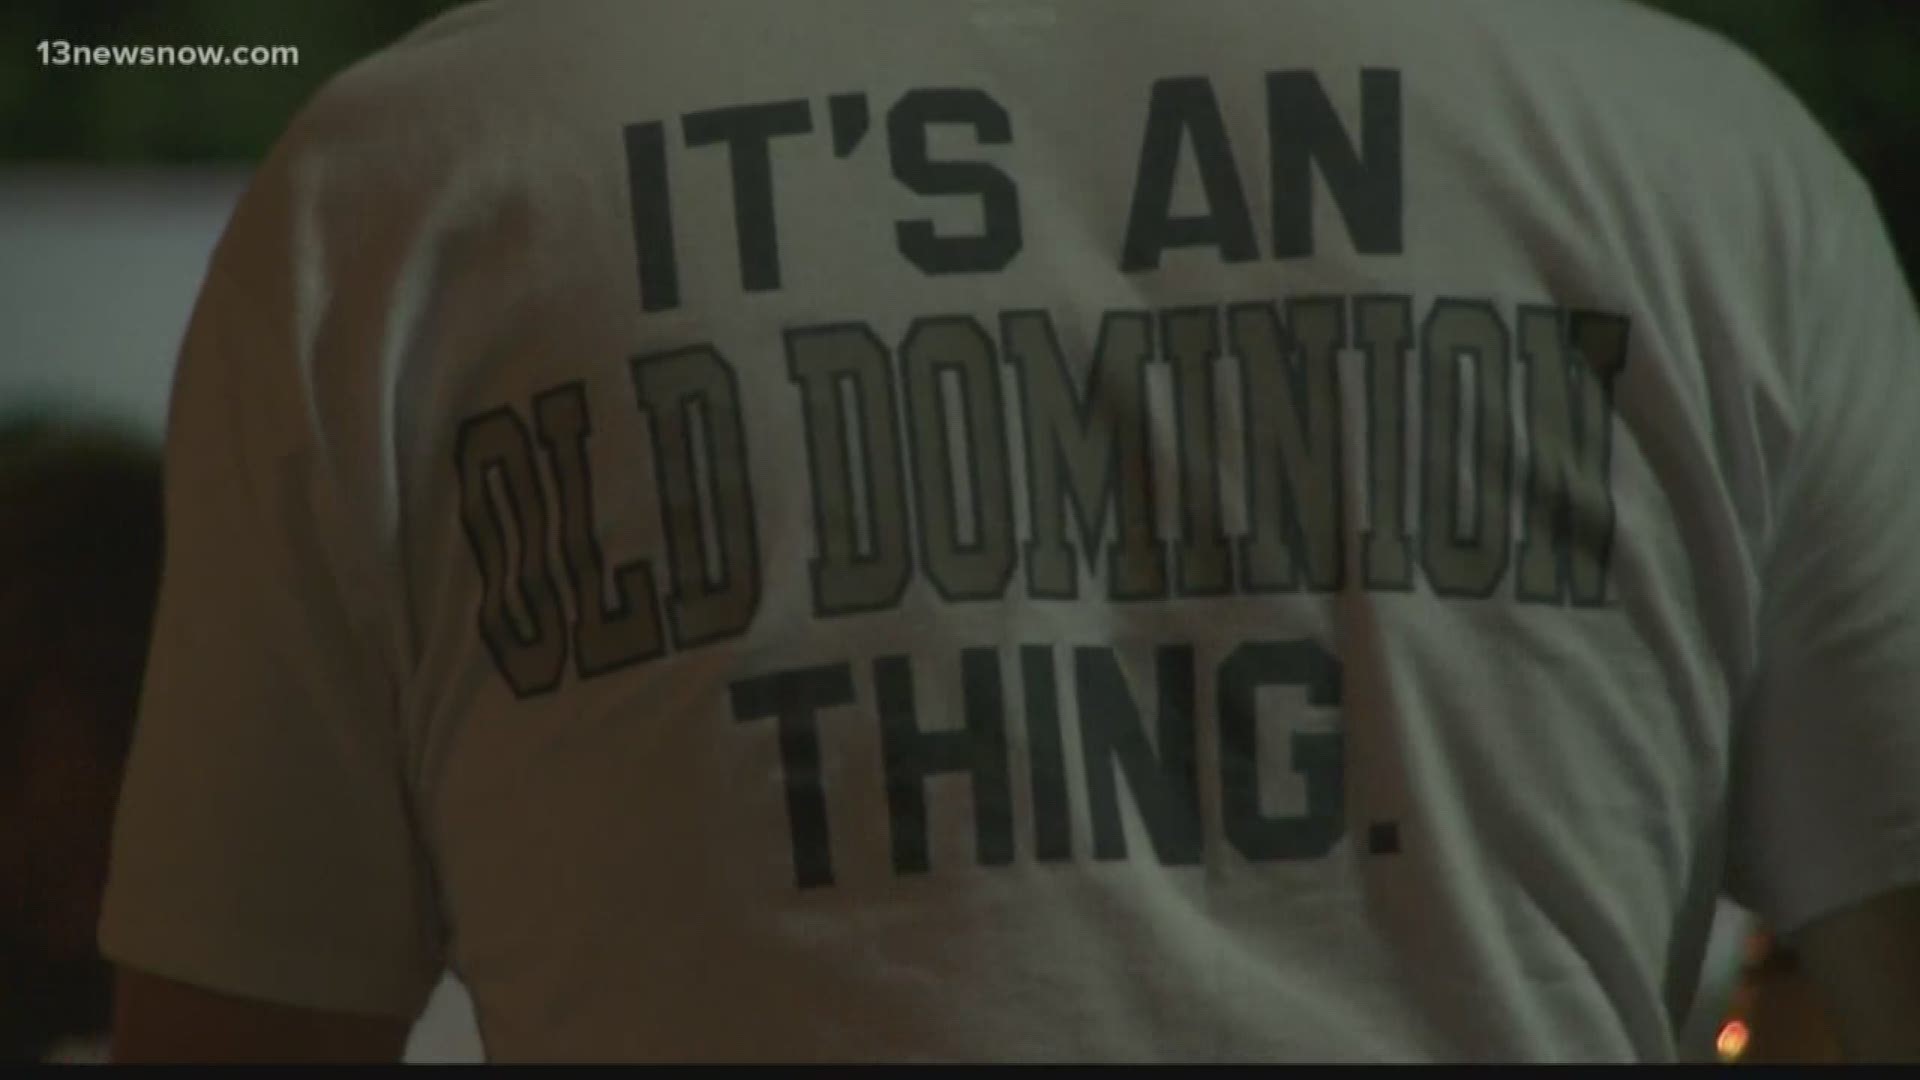 It was a night of celebration in Norfolk on Saturday night for ODU football fans. Monarch fans were feeling on top of the world after an unthinkable win against Virginia Tech.